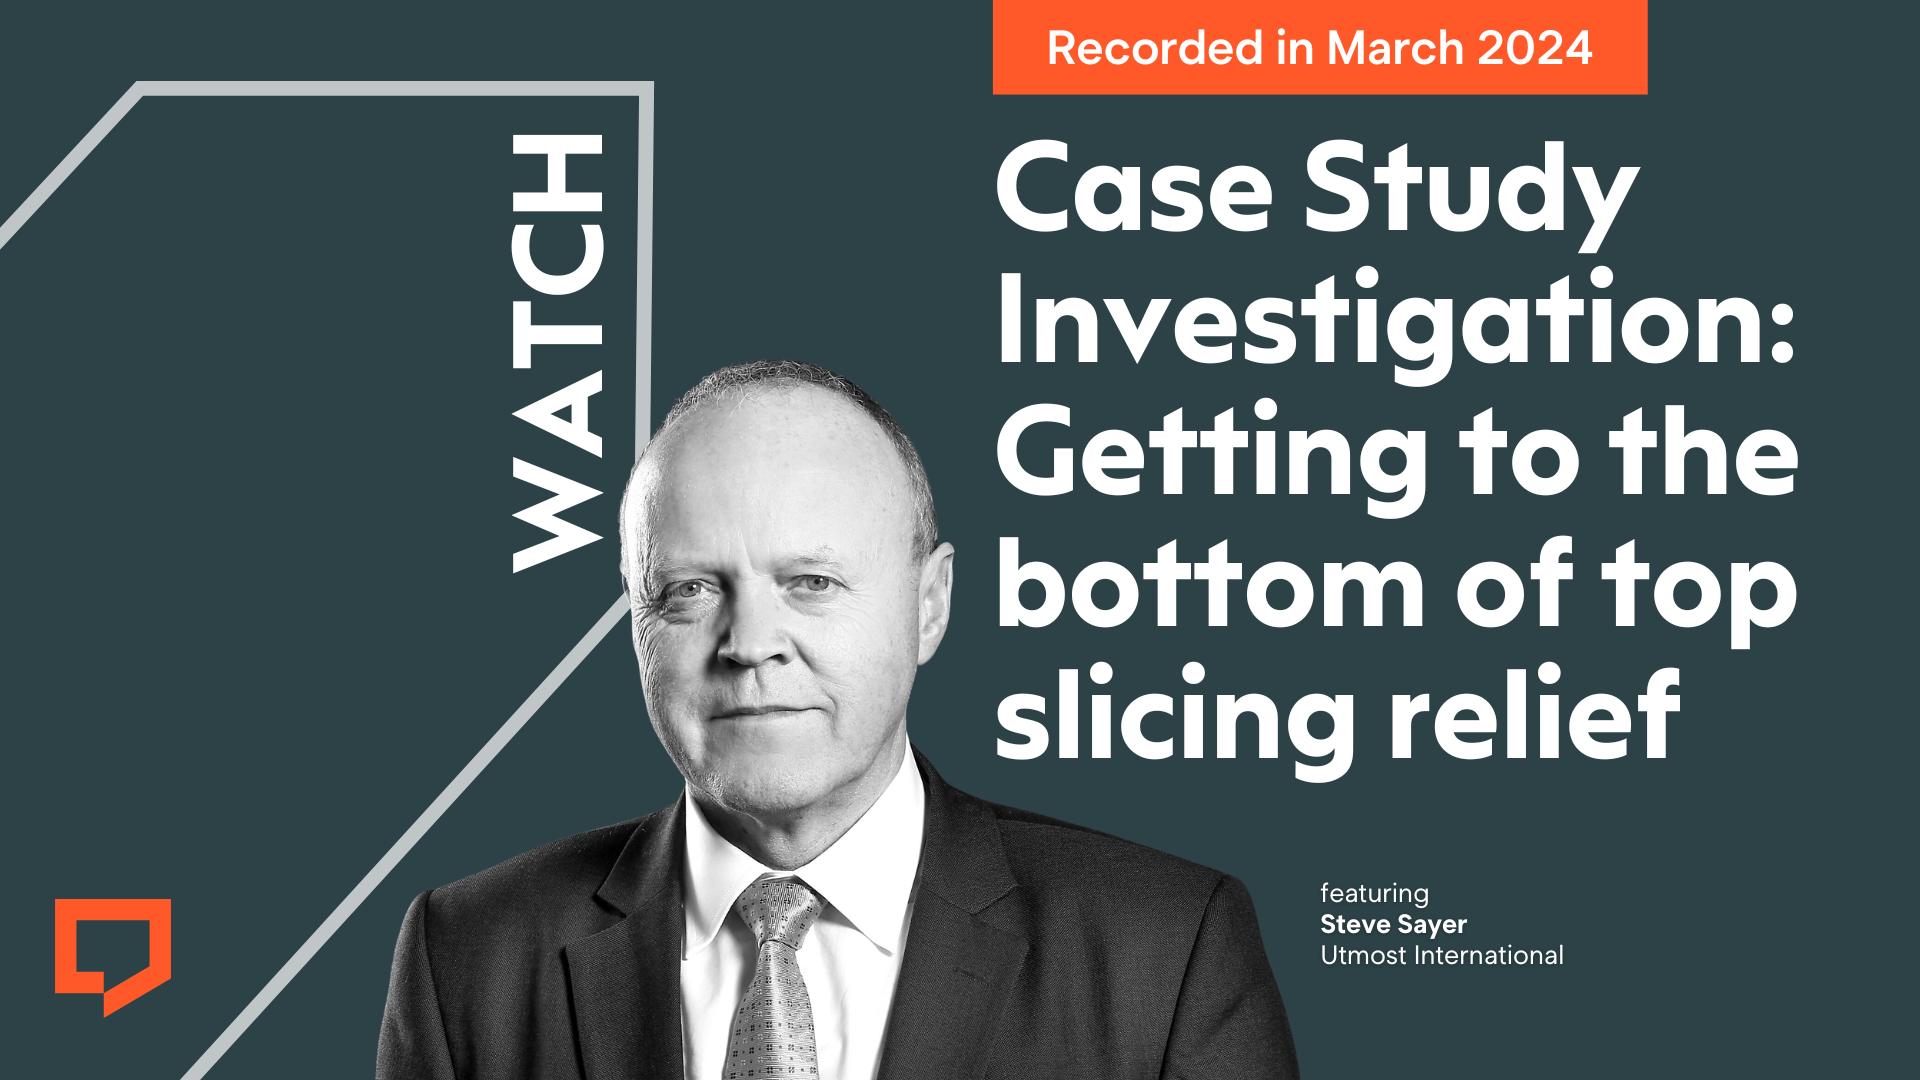 Watch Case Study Investigation: getting to the bottom of top slicing relief featuring Steve Sayer from Utmost International